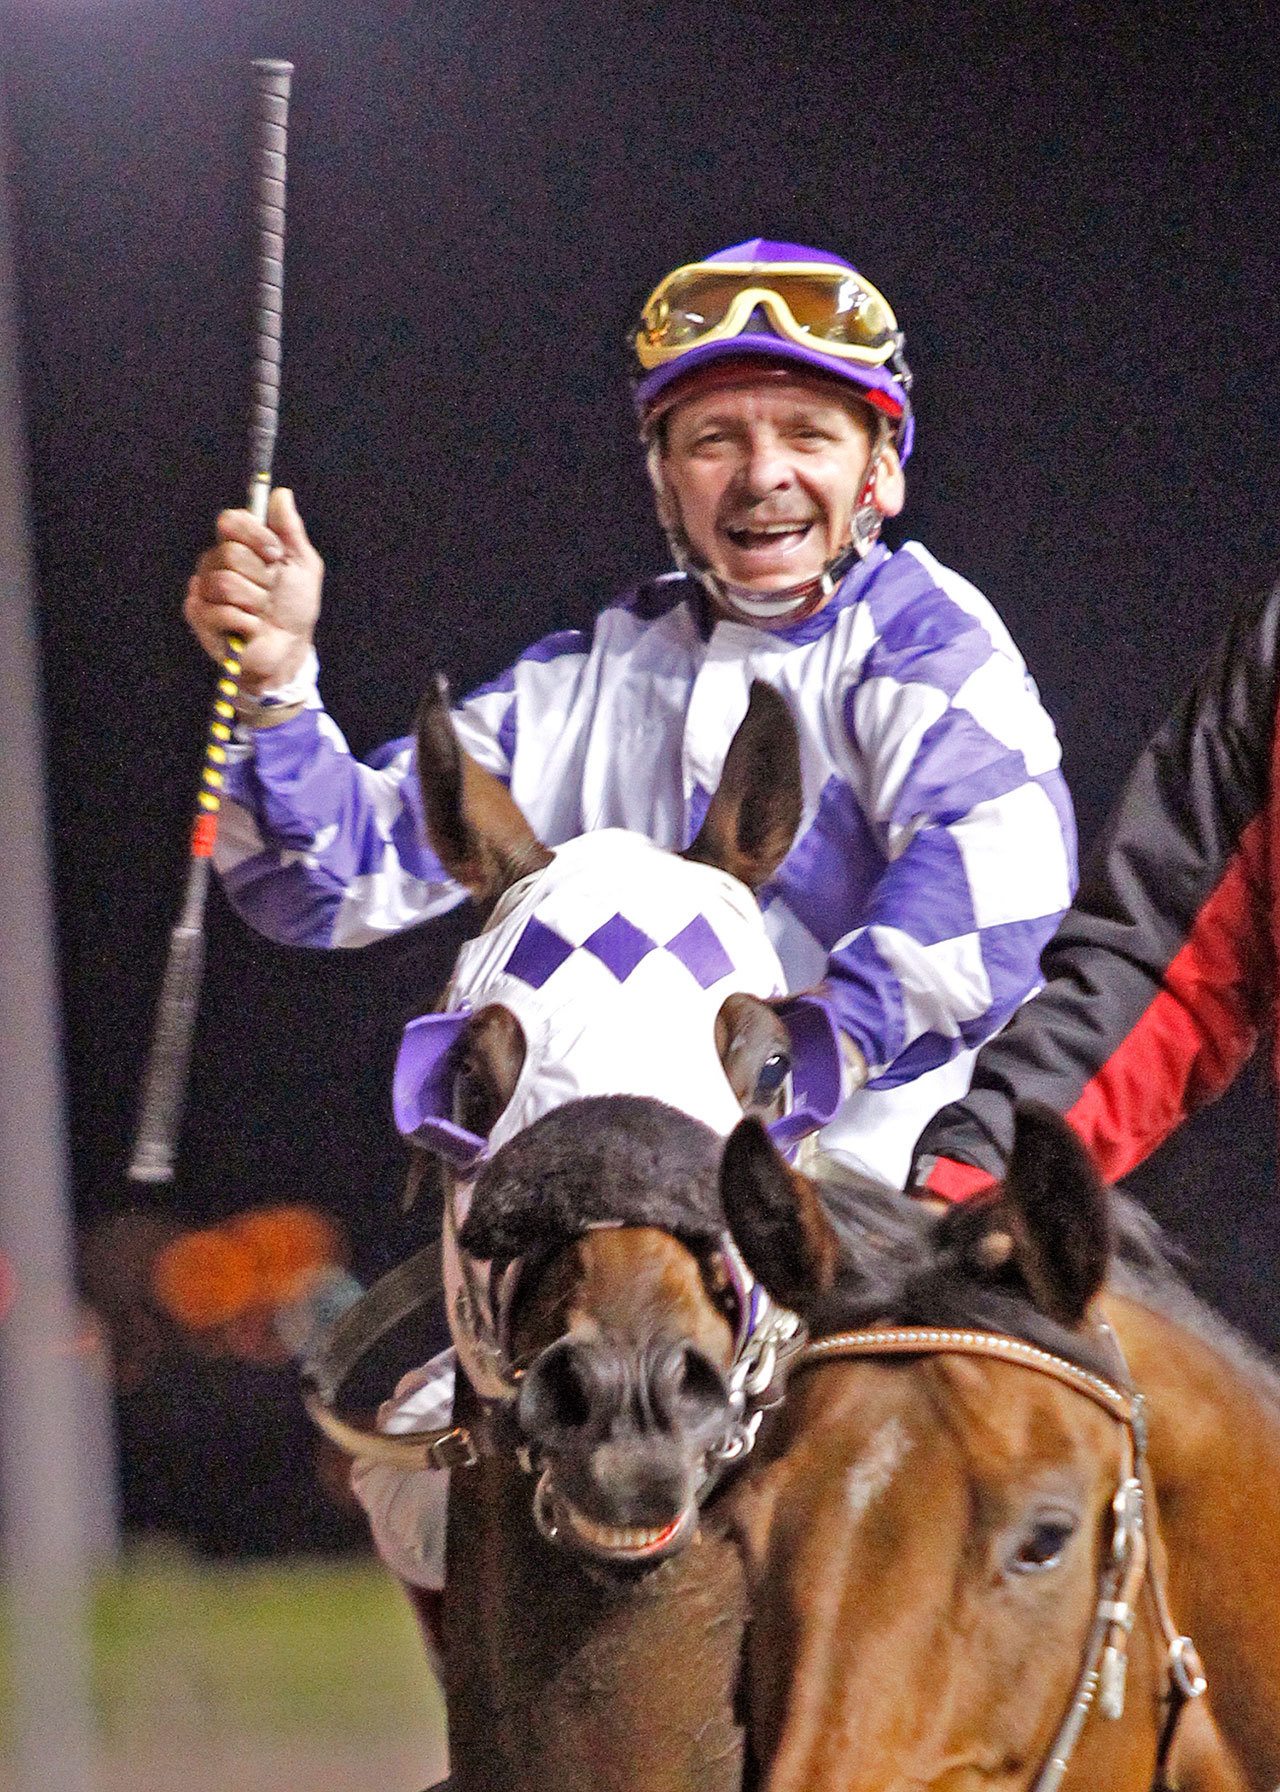 Gallyn Mitchell is the only jockey to ride the first 20 seasons at Emerald Downs, piling up 1,419 wins, almost $15 million in earnings and a record 80 stakes wins. COURTESY PHOTO